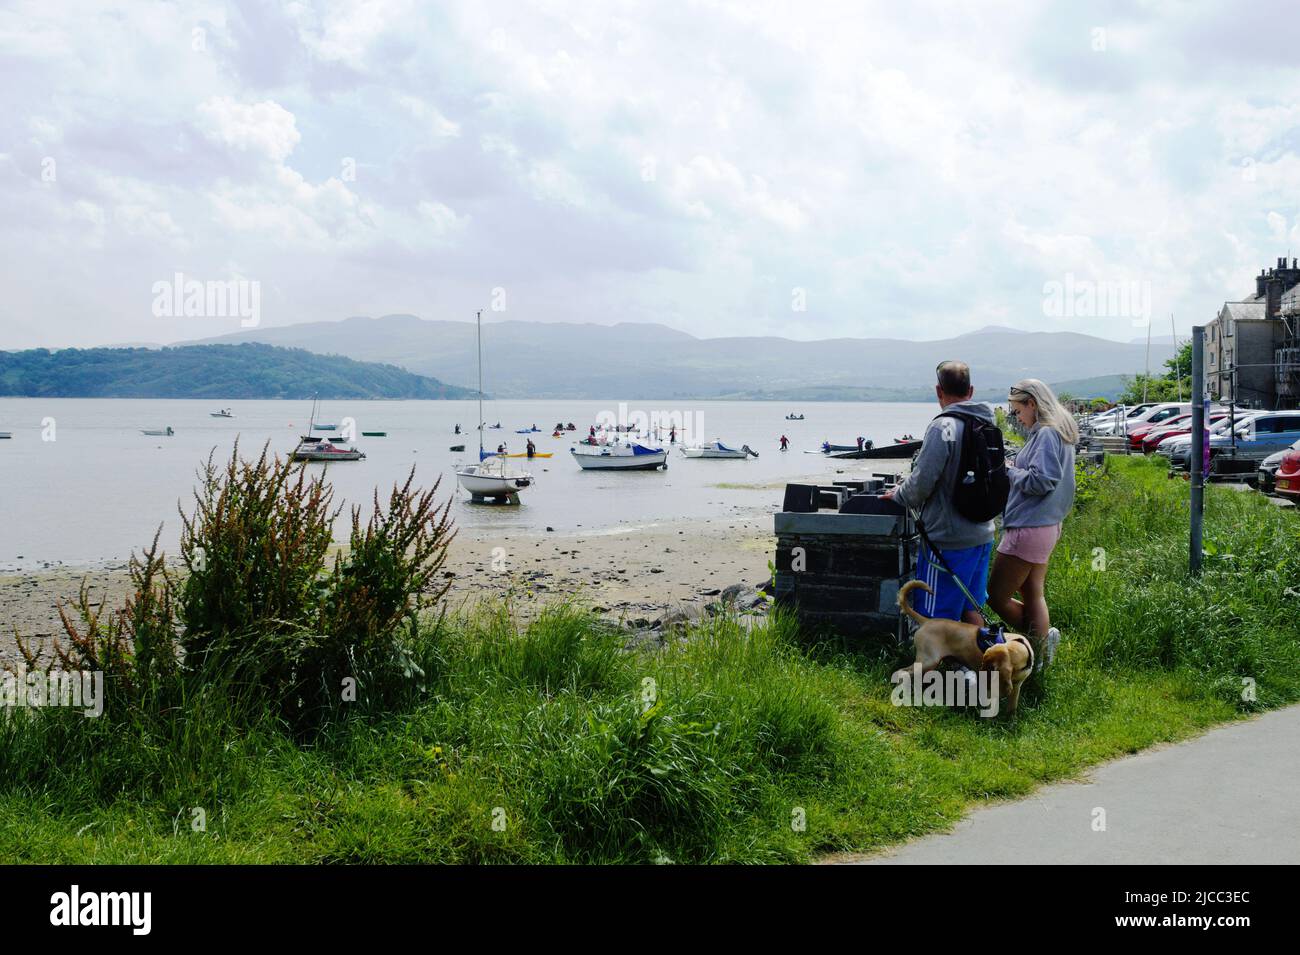 Porthmadog, Wales. Quaint Borth Y Gest village. Tourists look over the picturesque small bay on a summer day.  Landscape aspect shot with copy space. Stock Photo